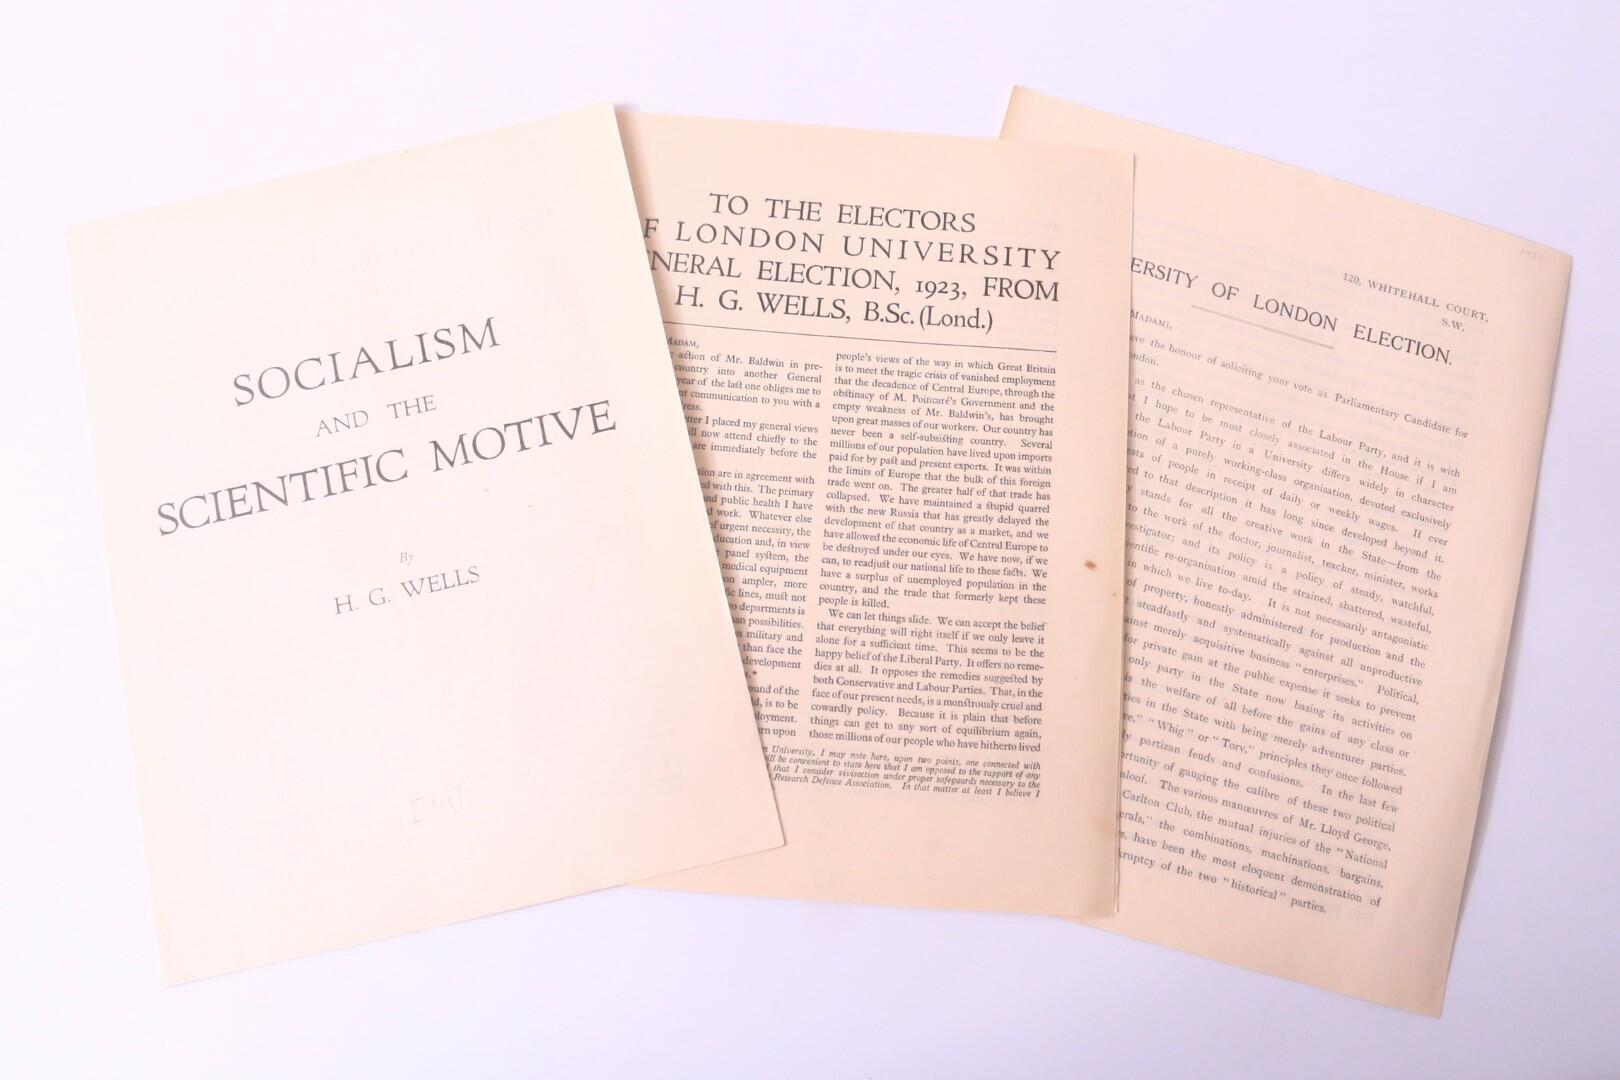 H.G. Wells - Three Pamphlets [comprising] University of London Election; To the Electors of London University General Election; and Socialism and the Scientific Motive - Various, 1922-1923, First Edition.